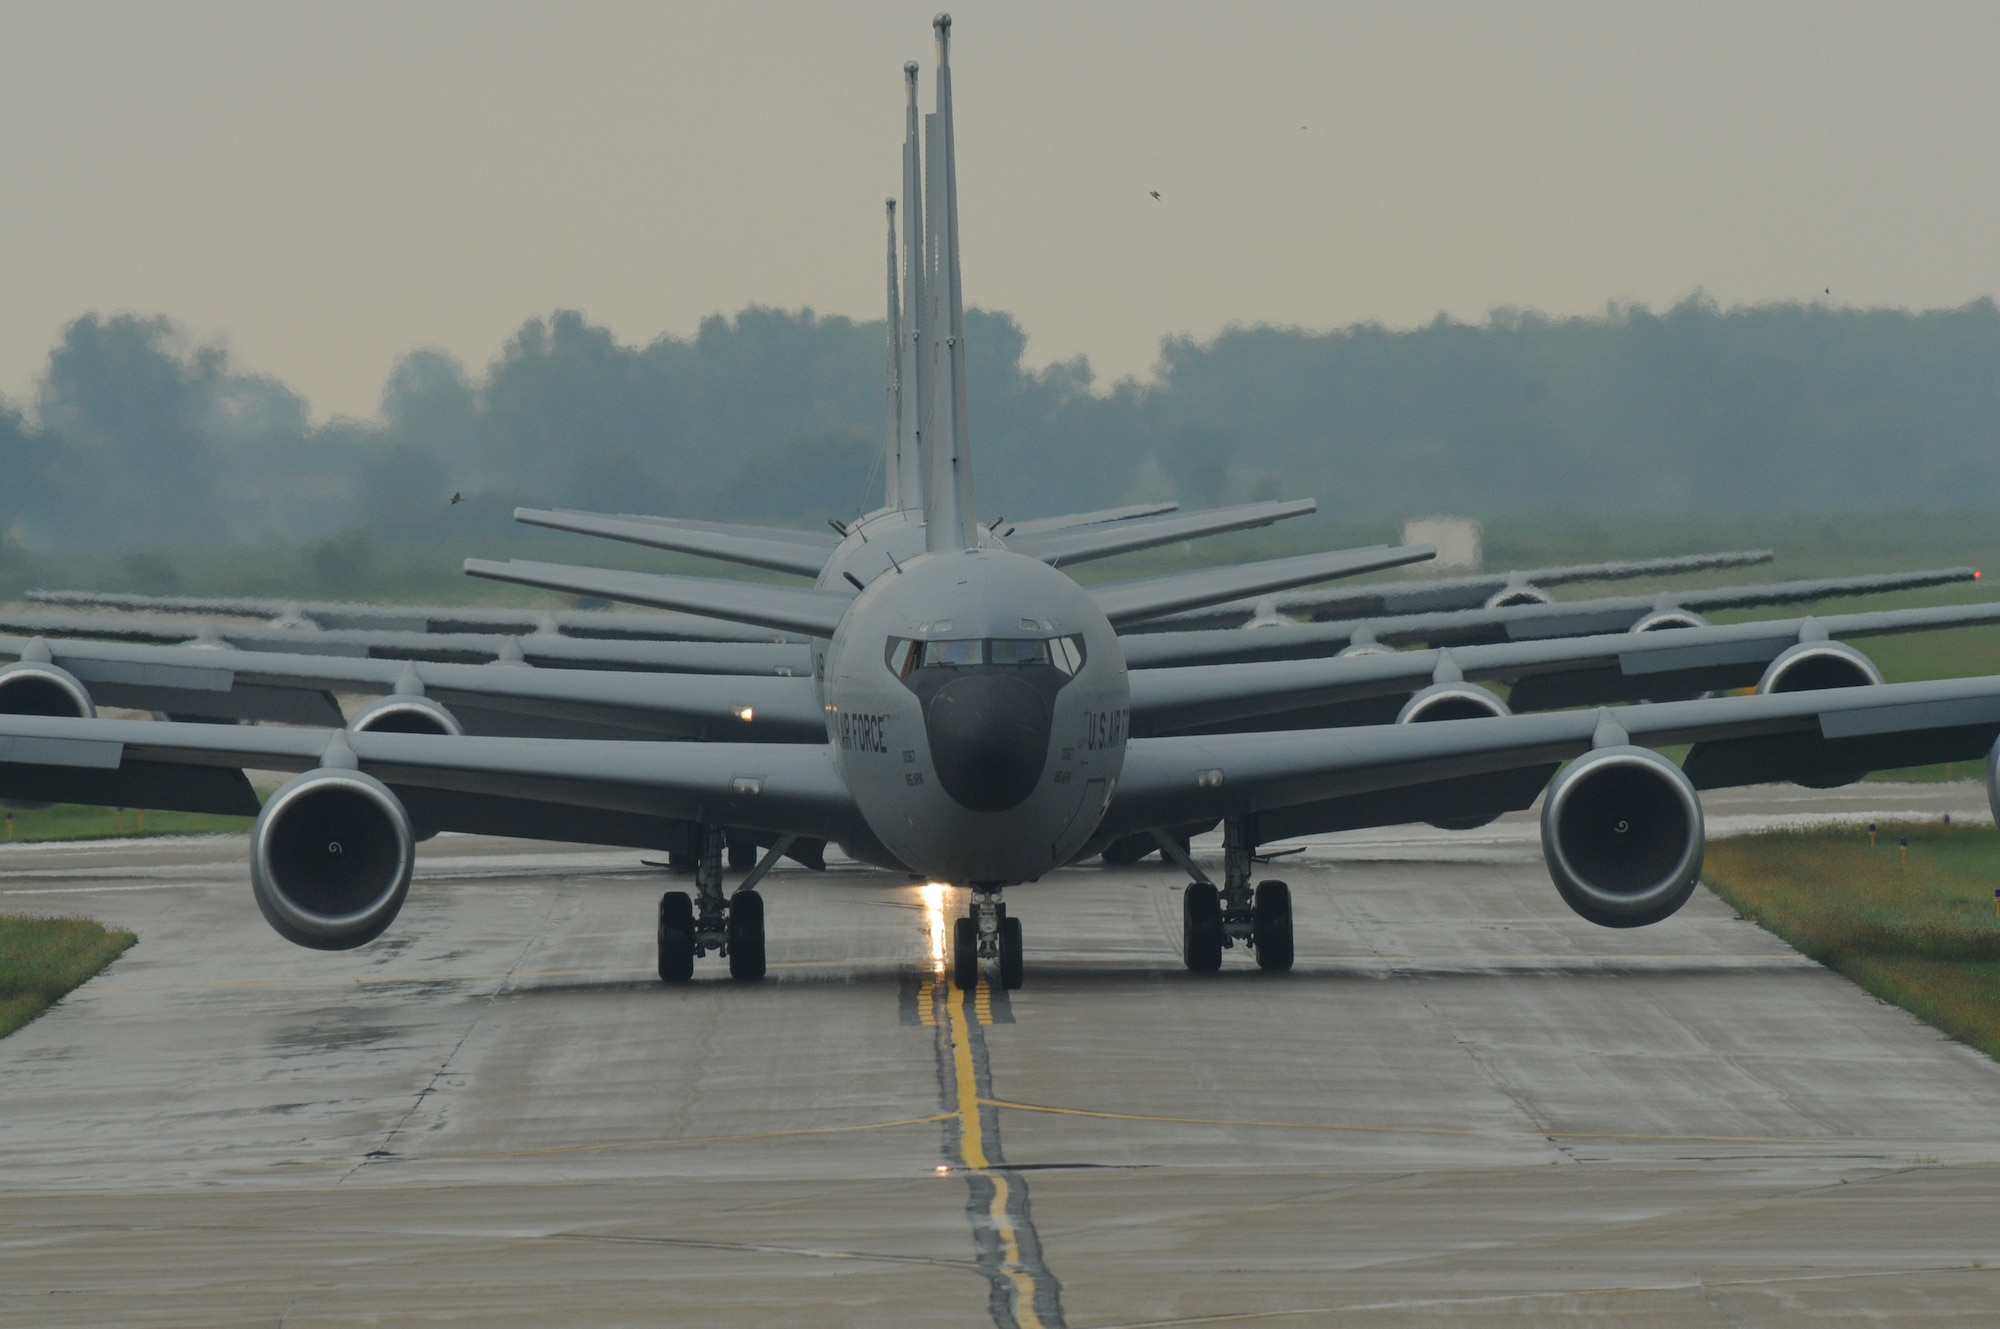 A group of four KC-135's from the 185th Air Refueling Wing, Iowa Air National Guard, taxi prior to take off from the Sioux City regional airport. The aircraft are departing for a local air refueling mission. Sioux City is home for to the 185th Air Refueling Wing.
USAF Photo by:  MSGT Vincent De Groot
